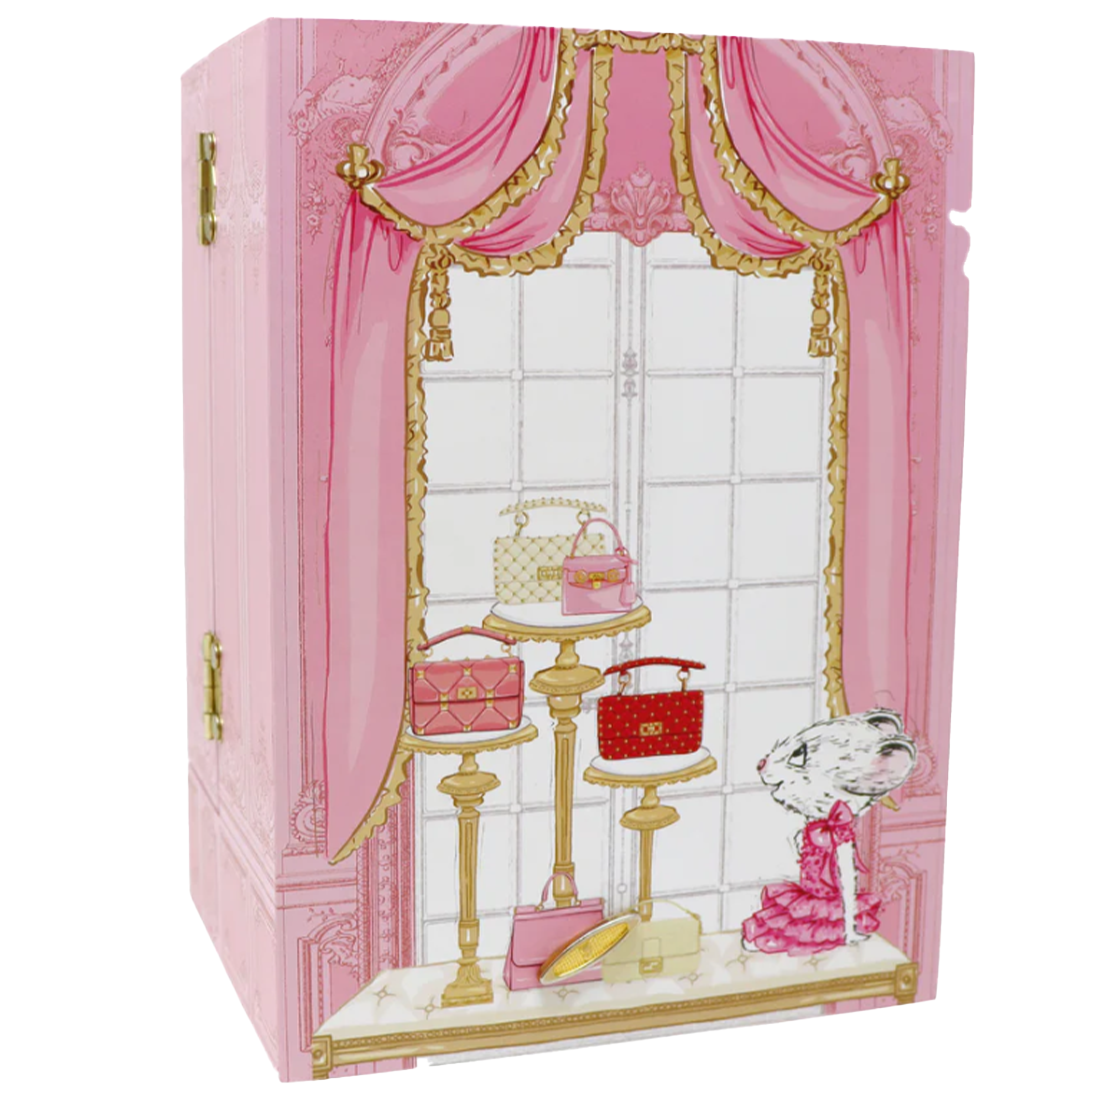 Claris - The Chicest Mouse in Paris™ Musical Jewellery Box